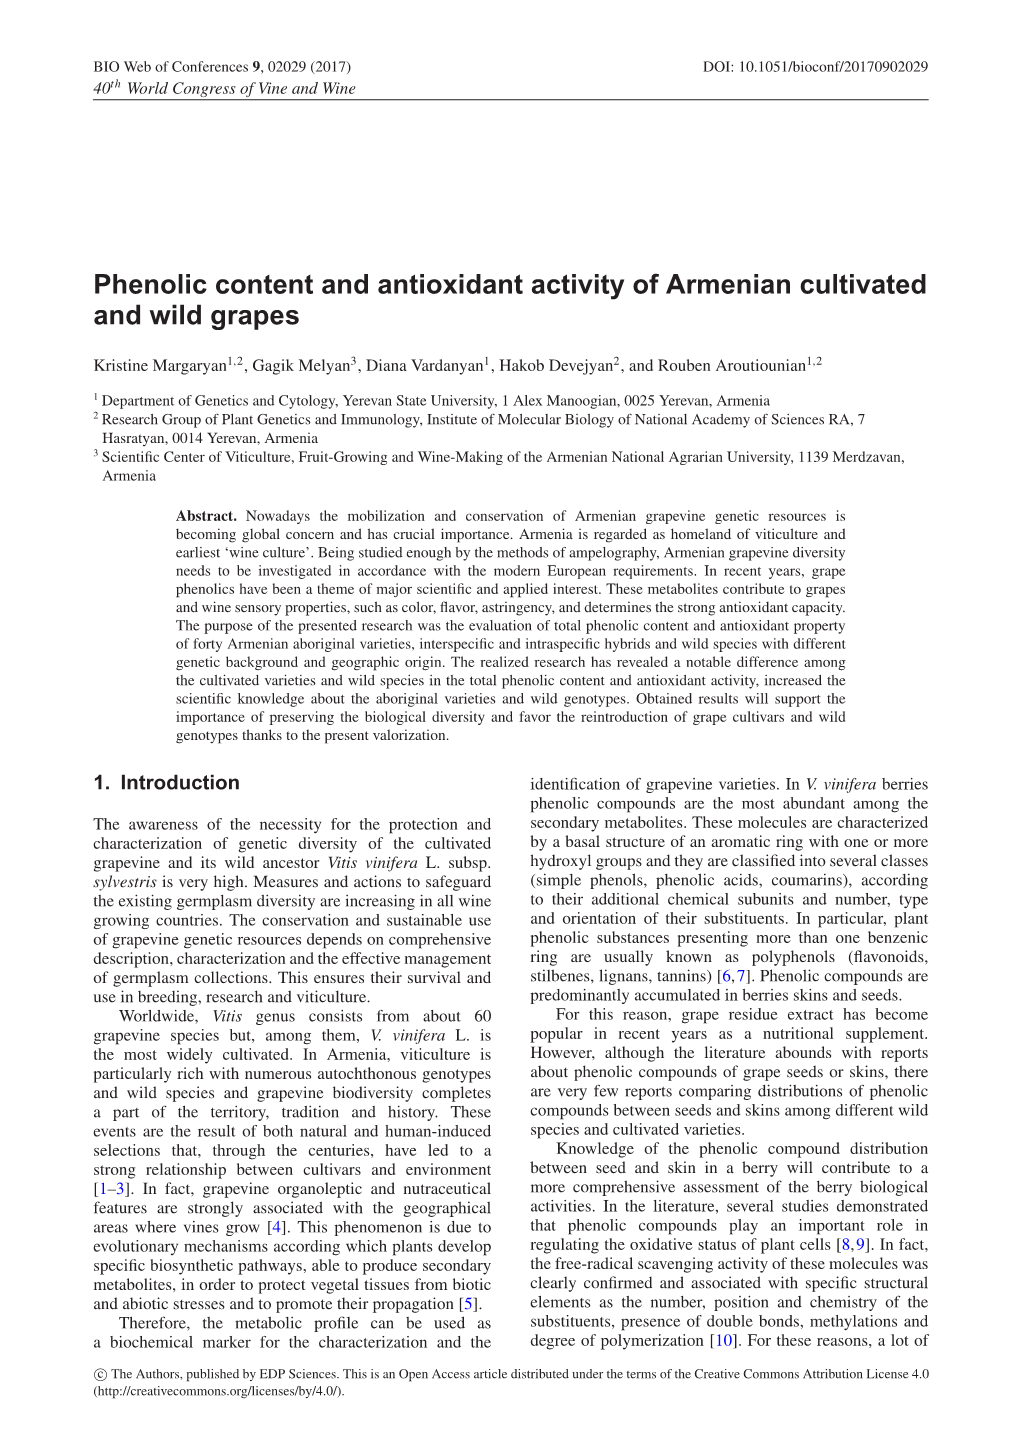 Phenolic Content and Antioxidant Activity of Armenian Cultivated and Wild Grapes